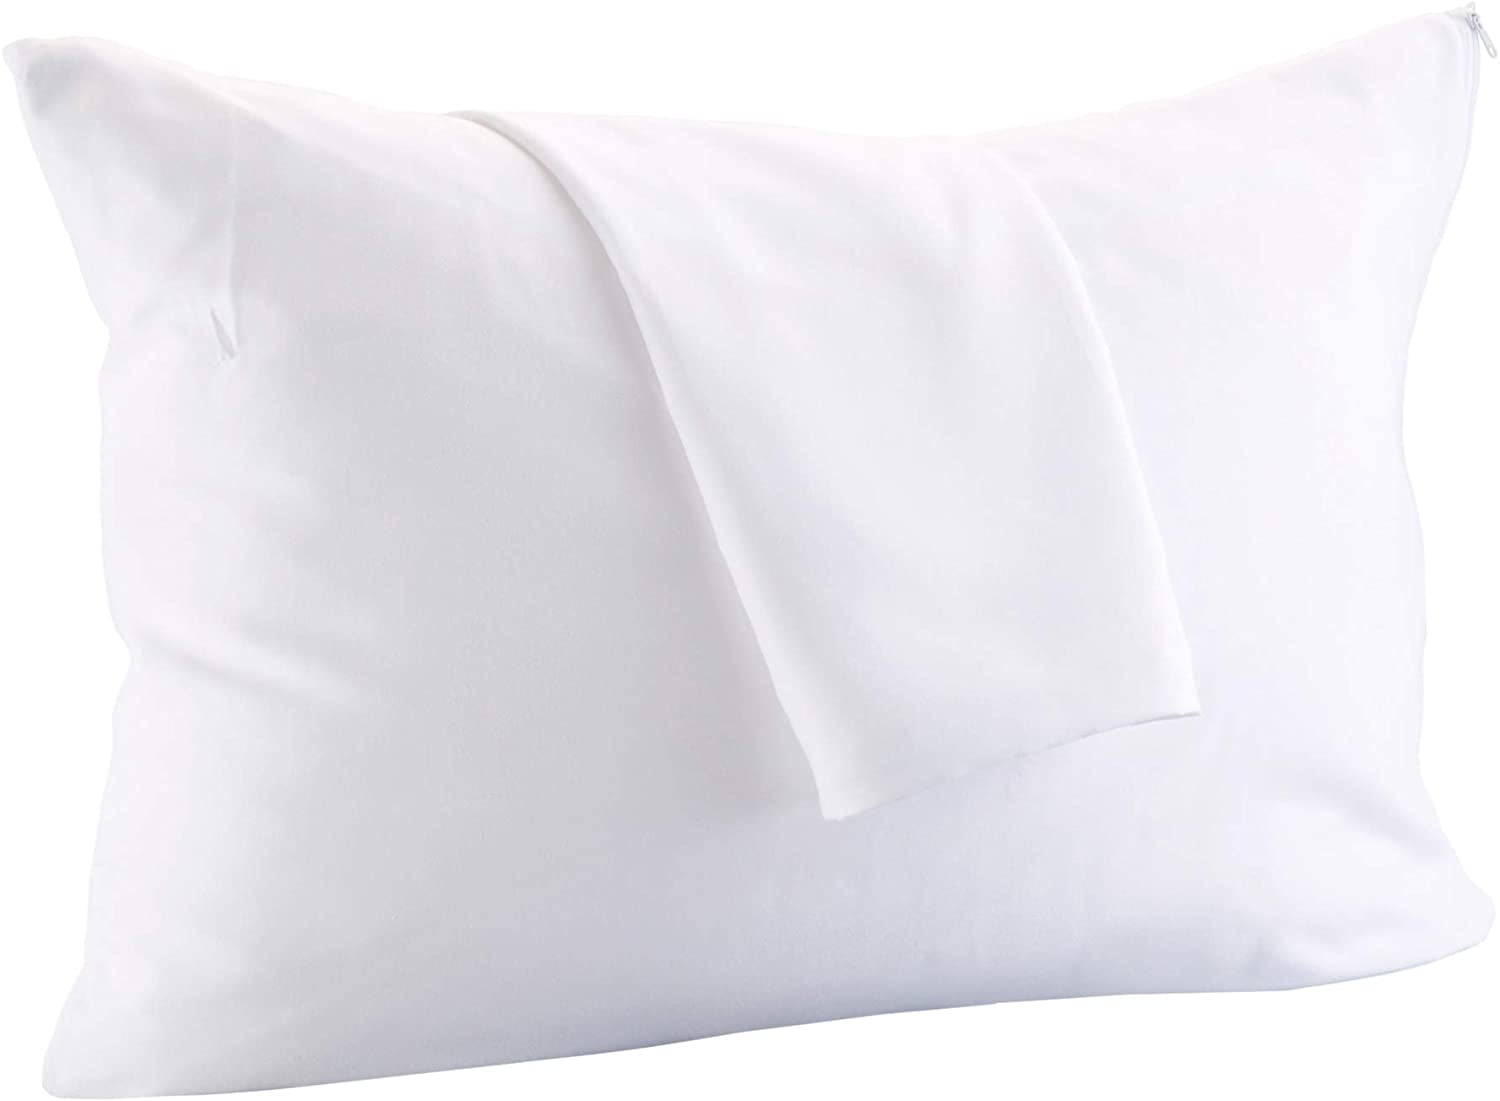 Details about   Zippered Pillow Protector Cases Encasement Hypoallergenic Cotton Cover 2-Set New 